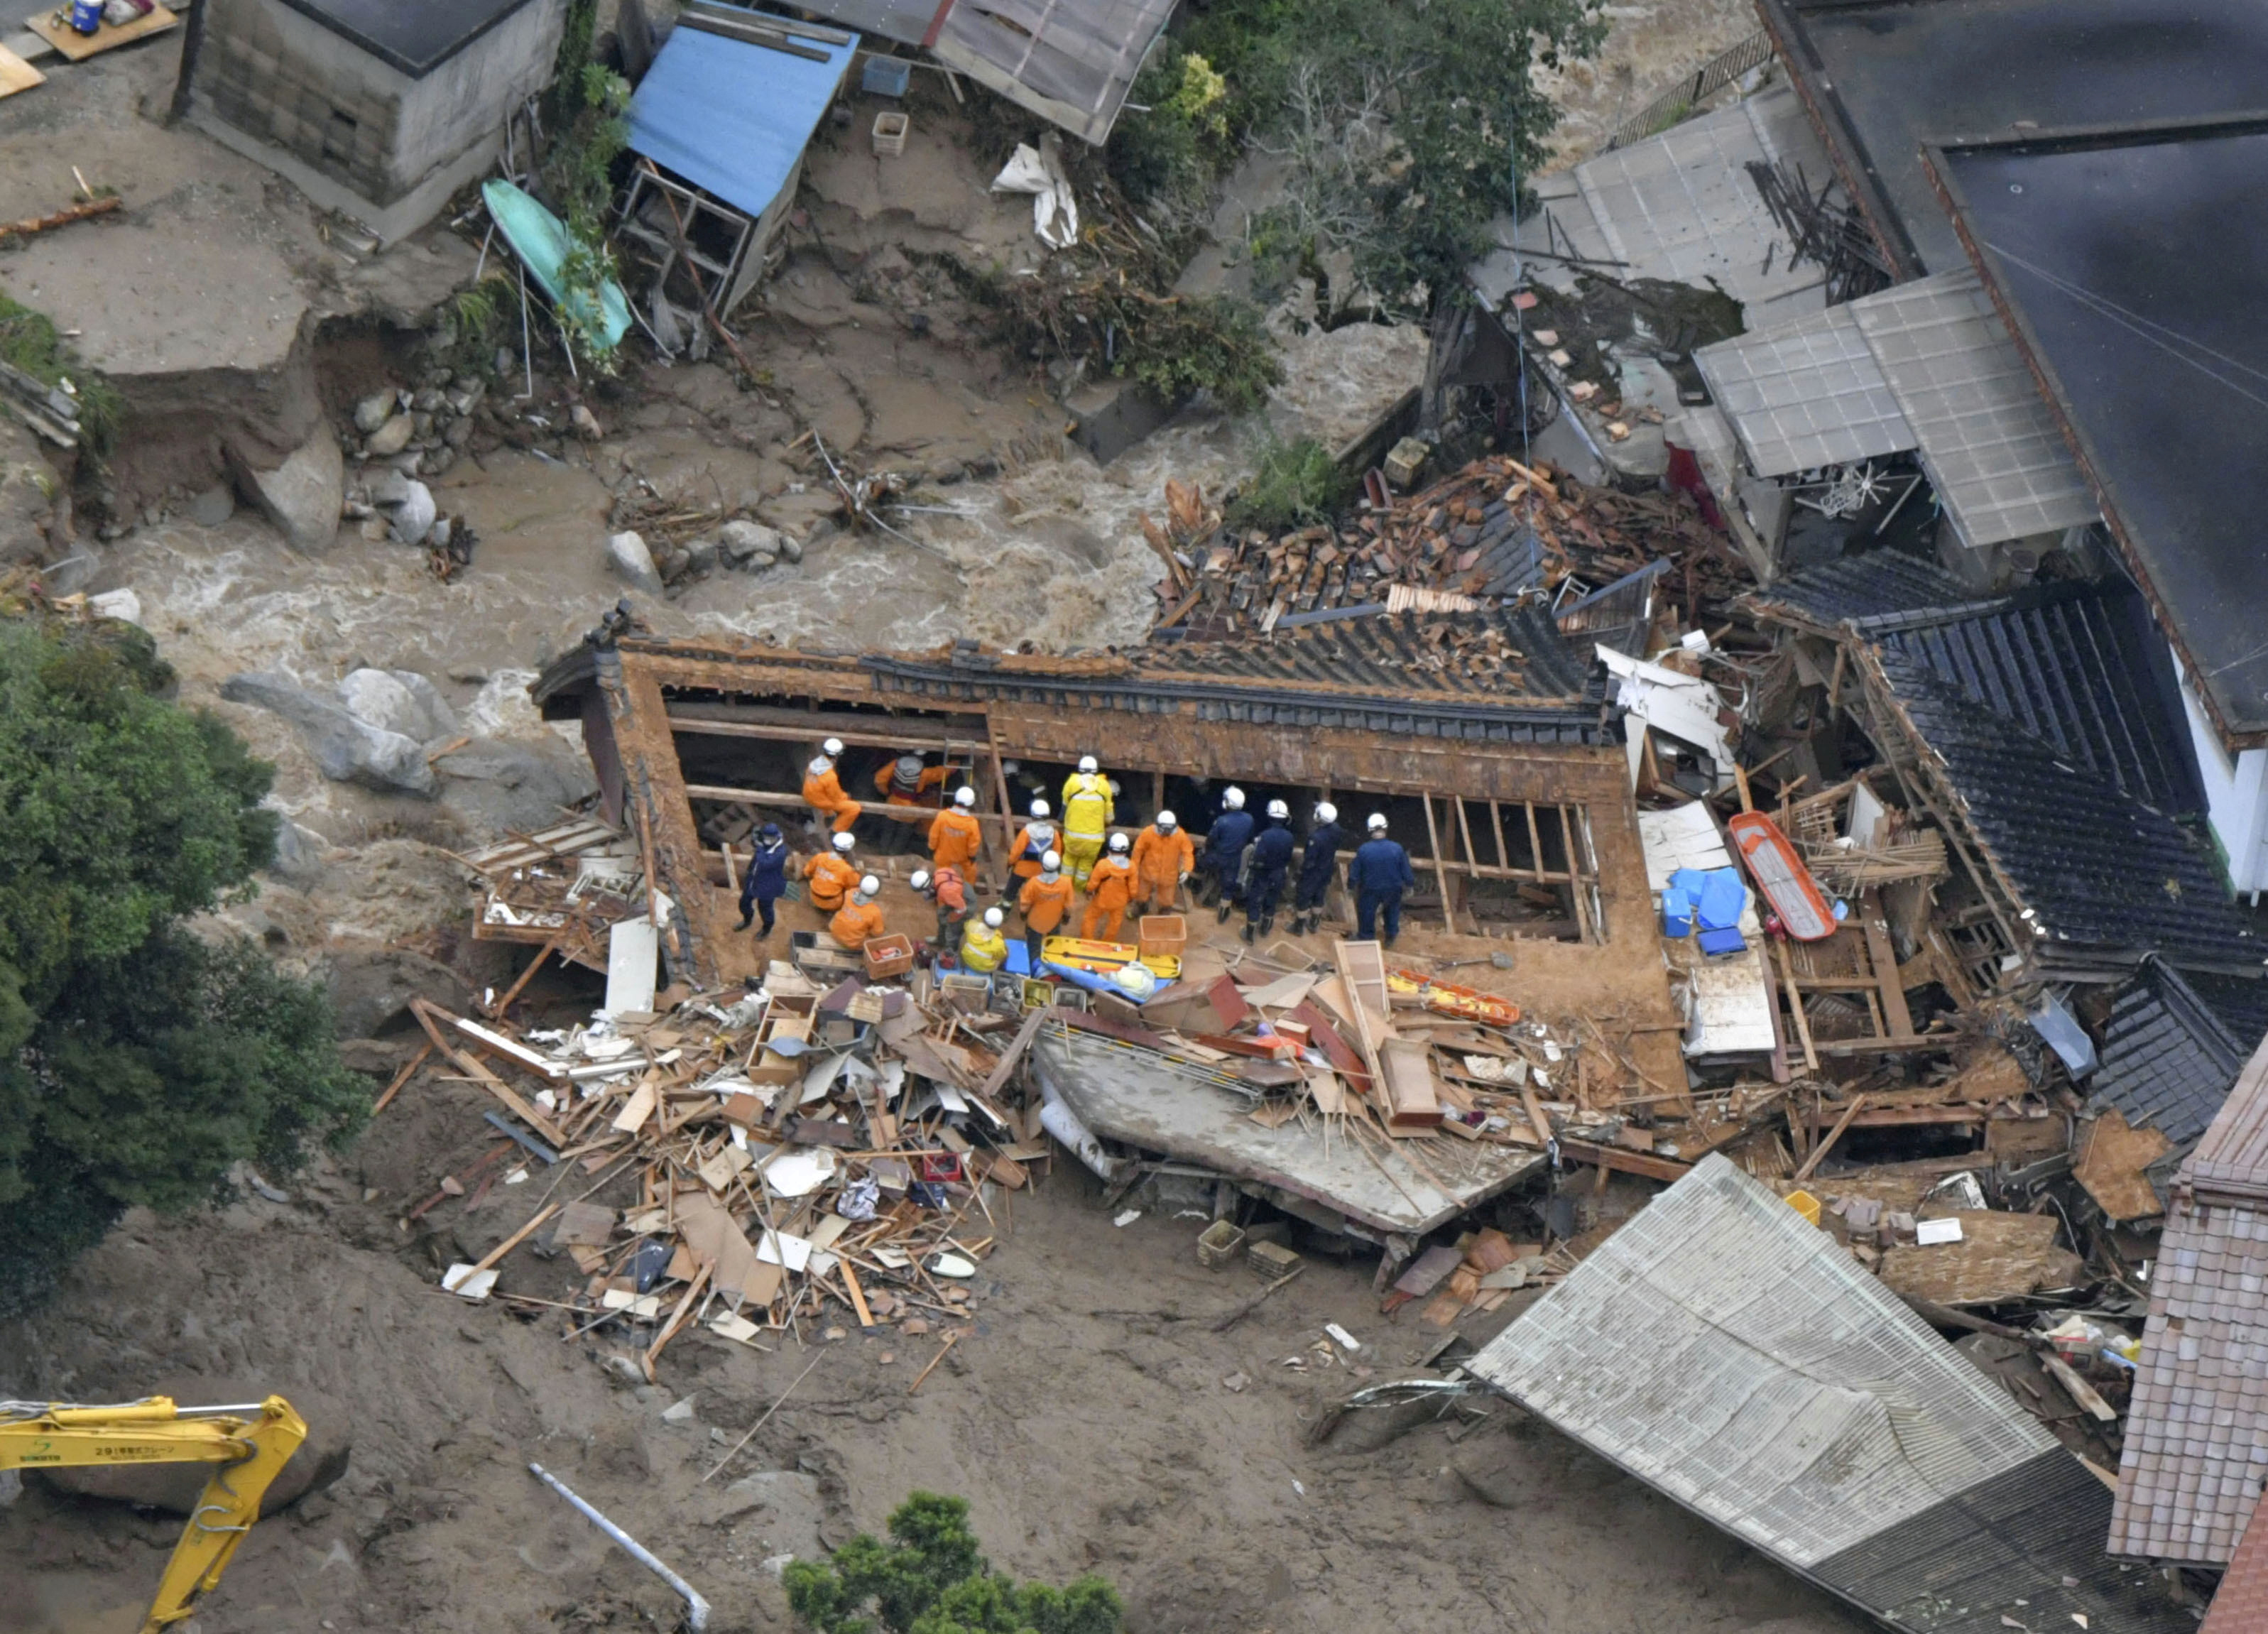 Photo taken from a helicopter shows the site of a mudslide following heavy rain in Karatsu